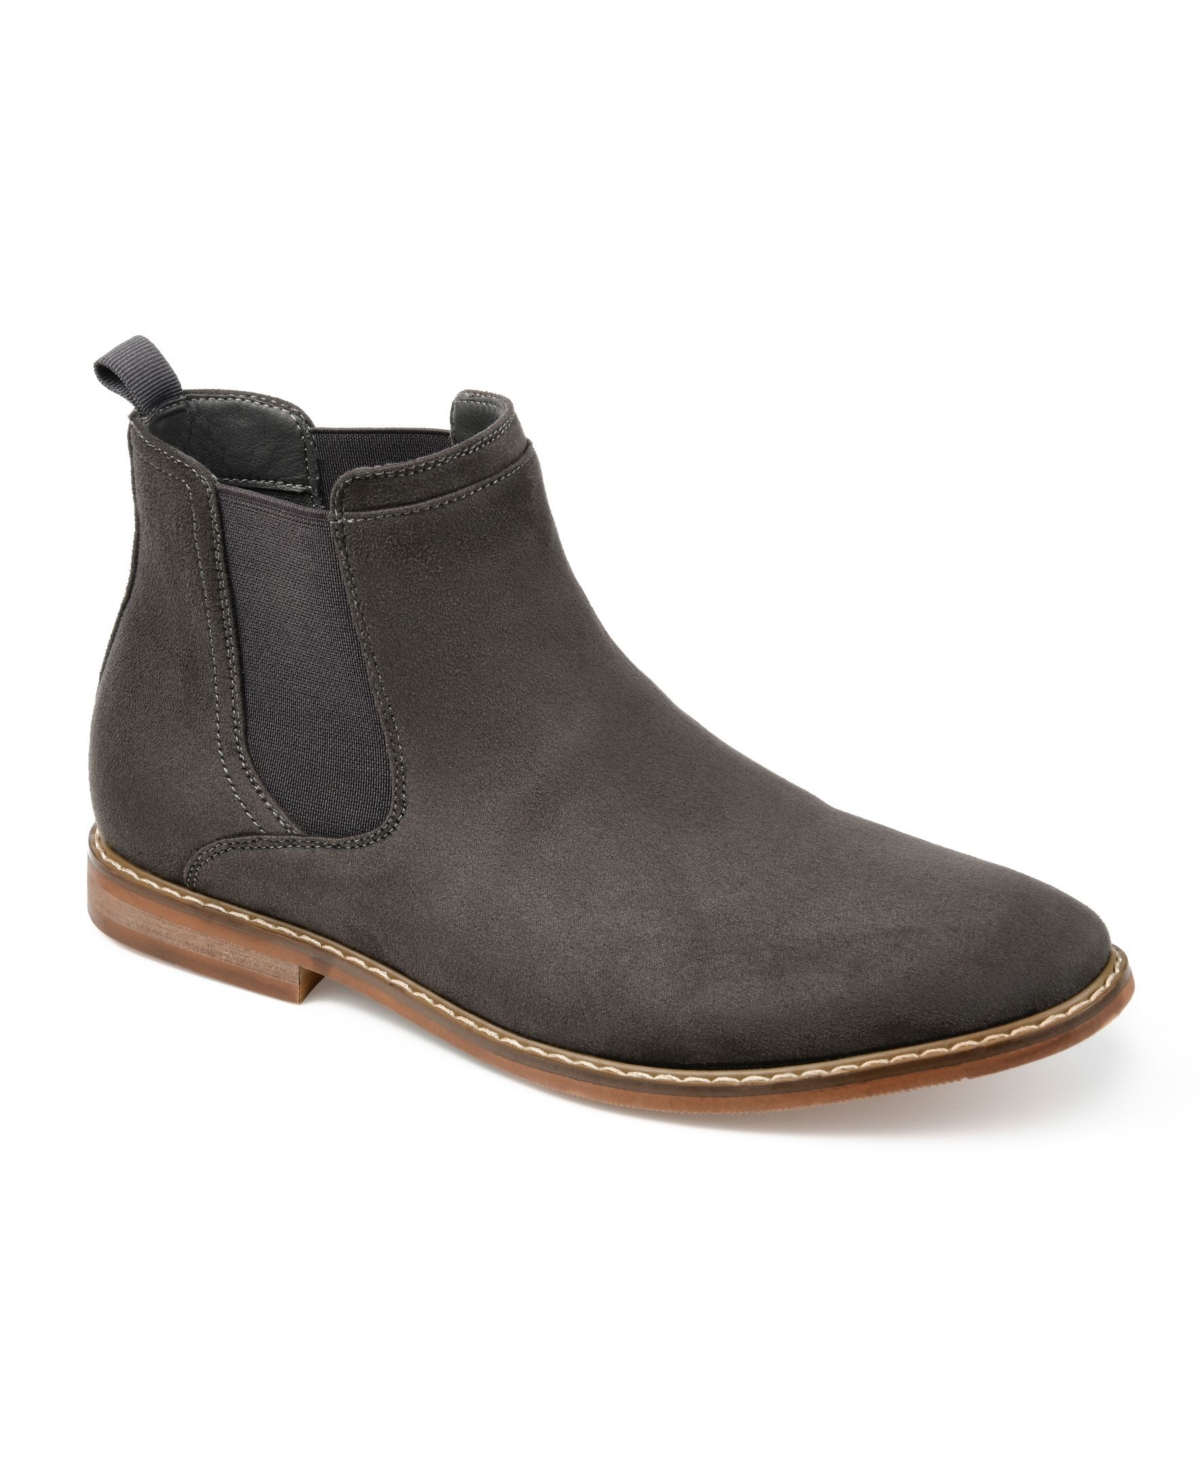 Marshall Men's Chelsea Boot - Taupe